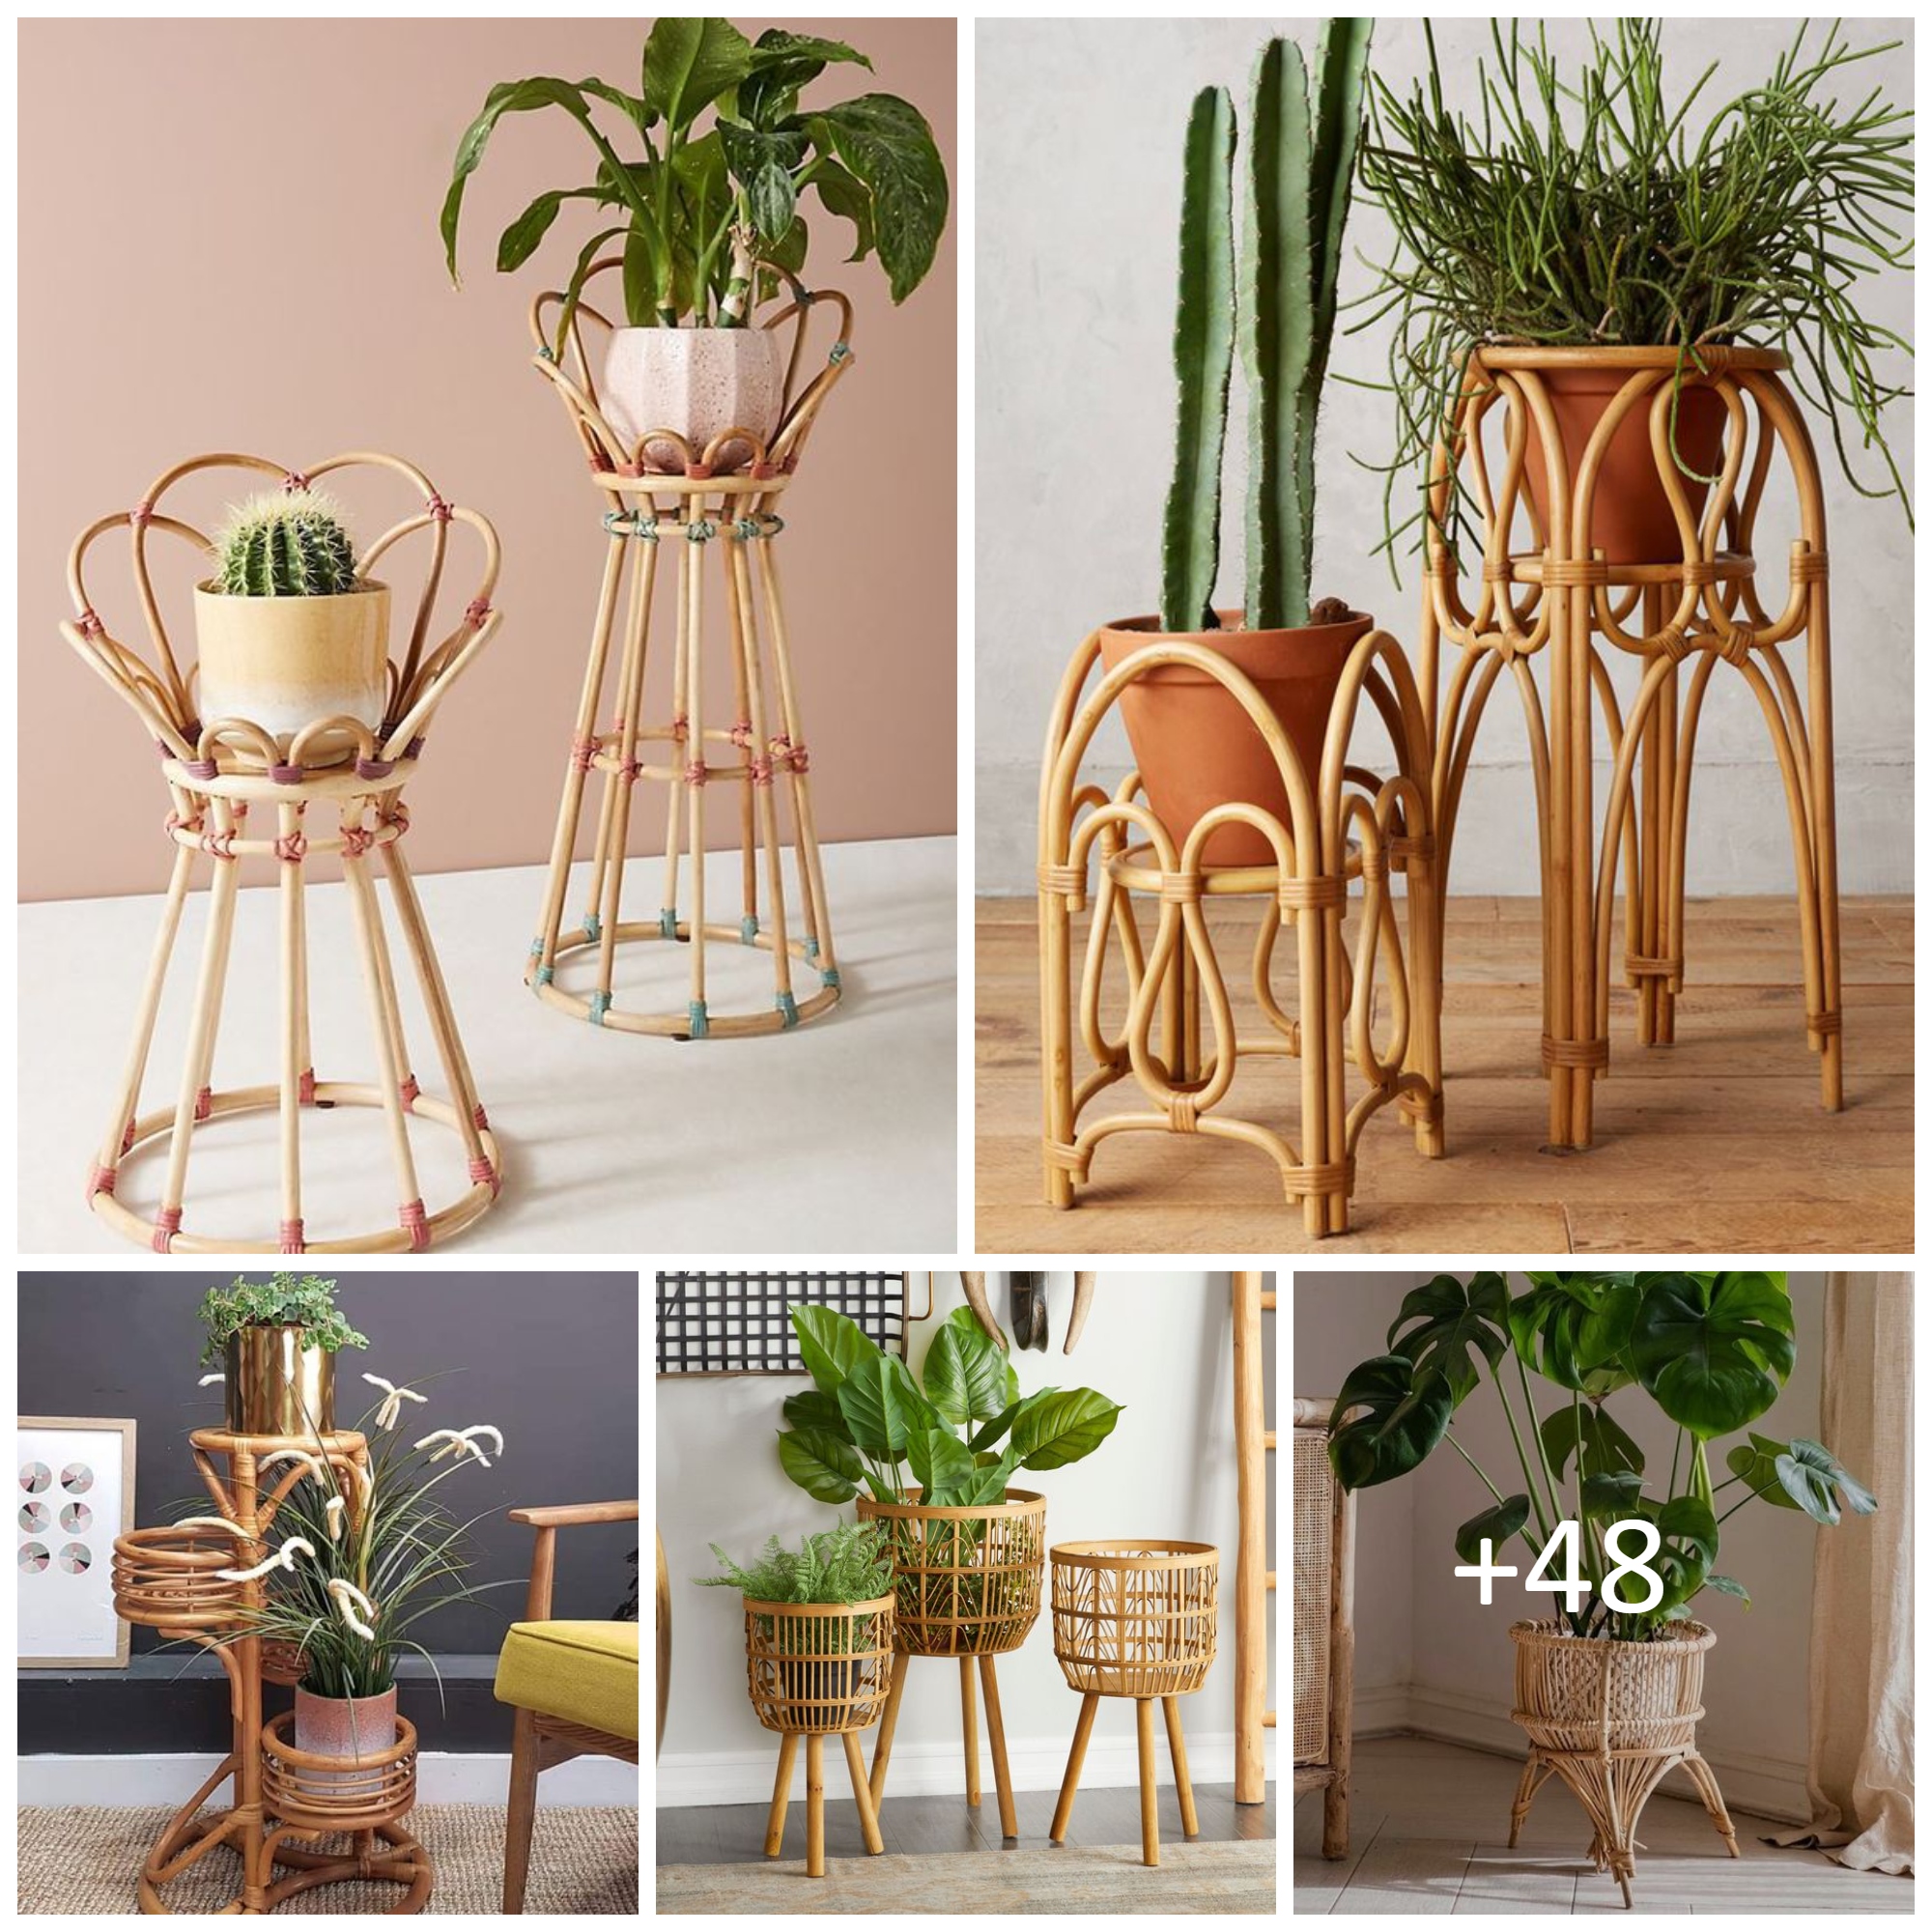 Rattan Planters to Show Off Your Plants in Style